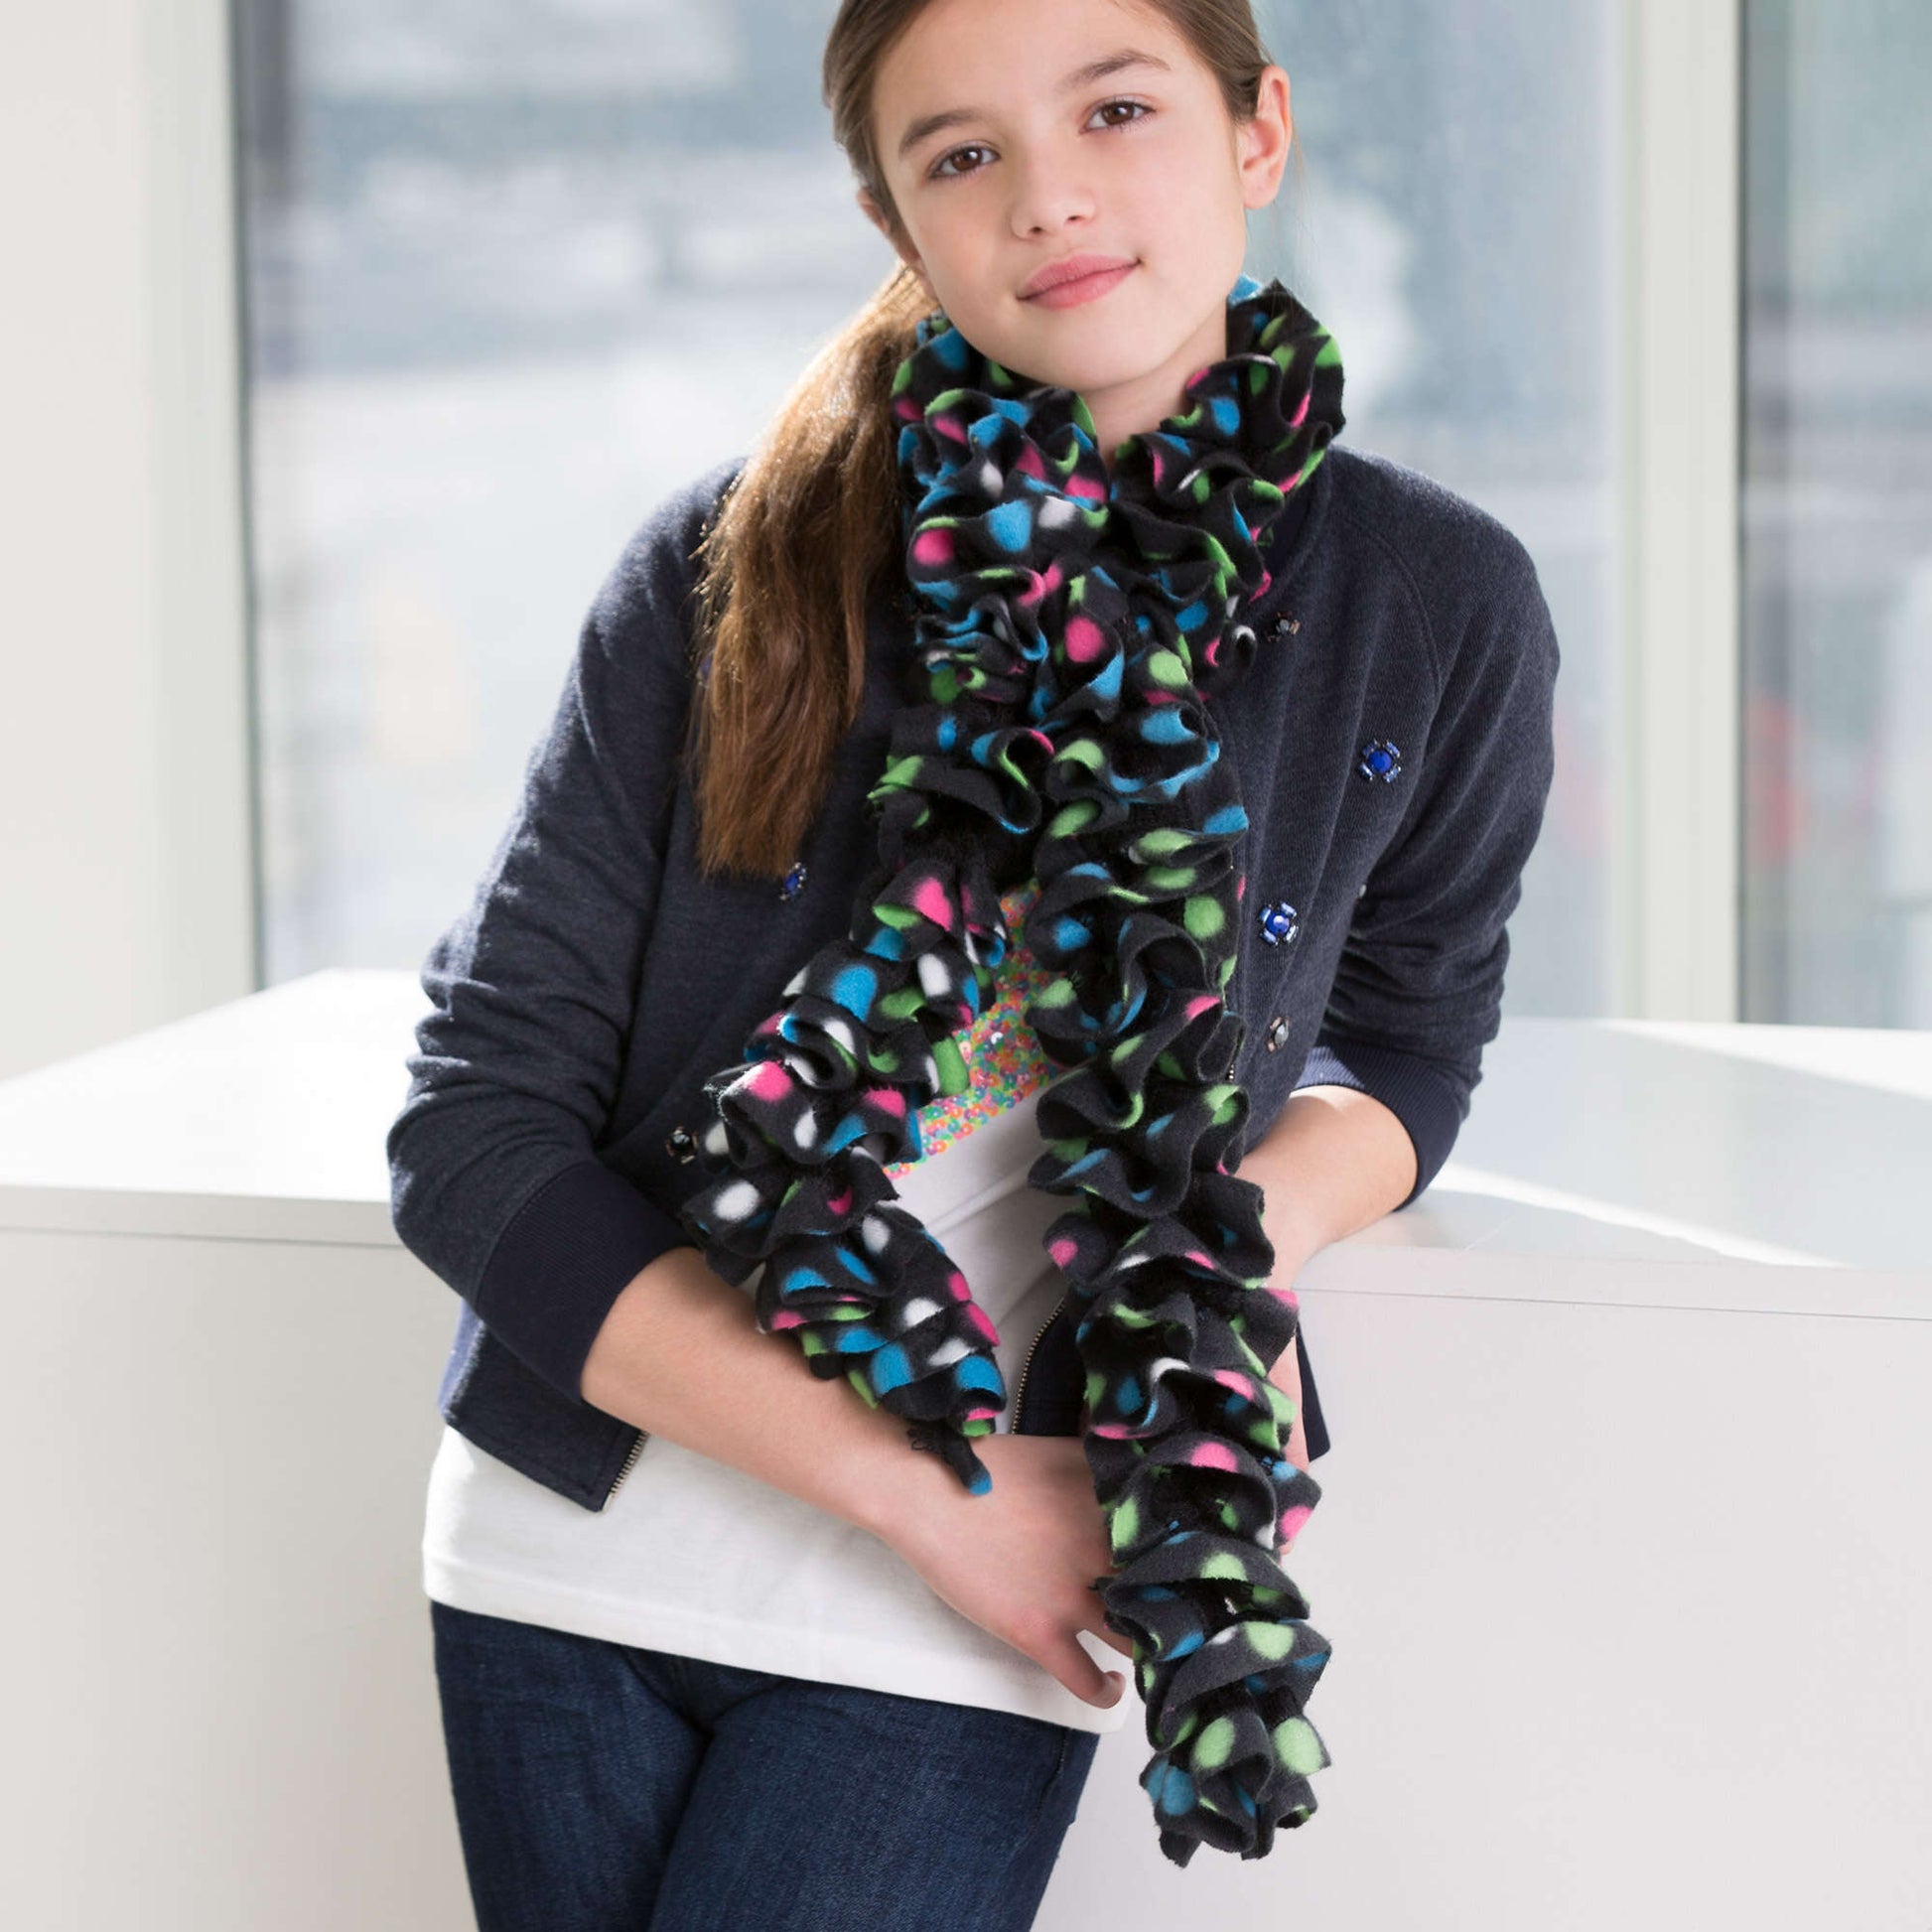 Free Red Heart Into The Wild Scarf Crochet Pattern